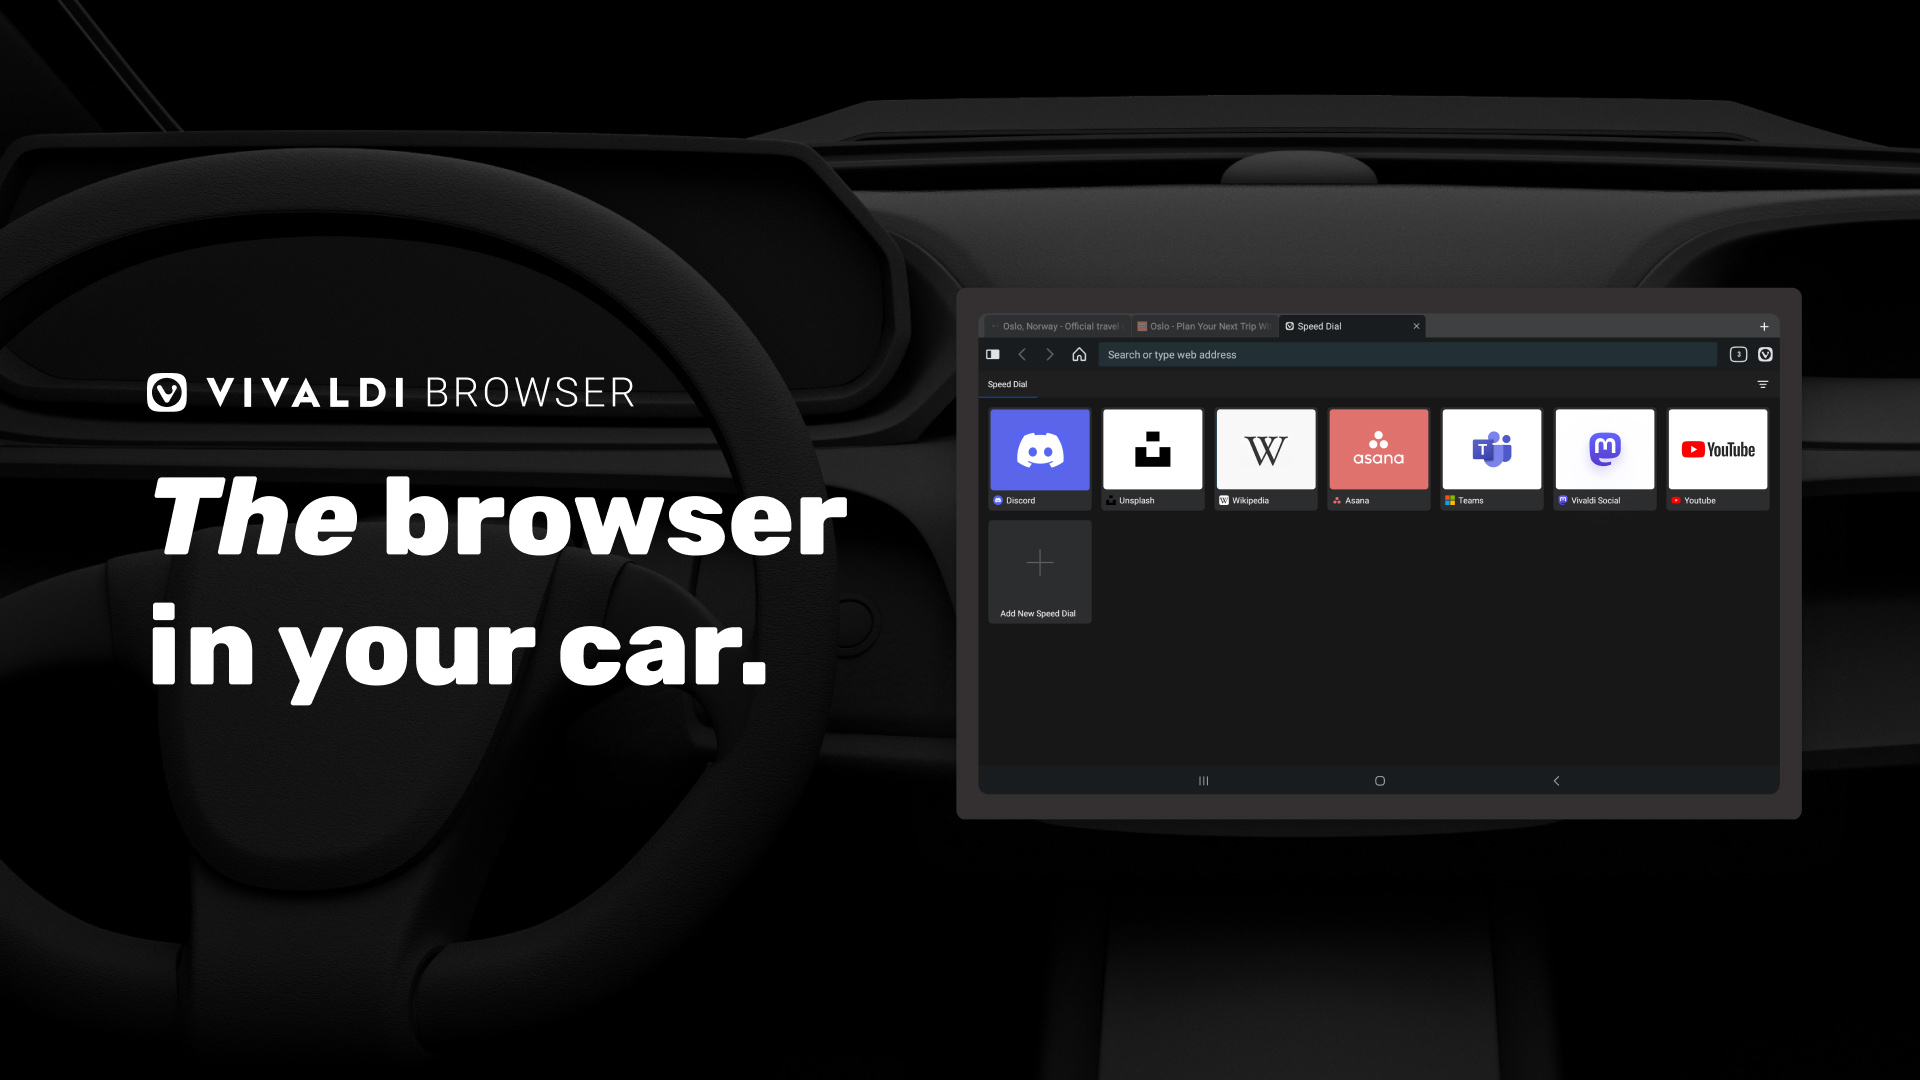 Vivaldi for Android Automotive  A full-scale web browser in your car